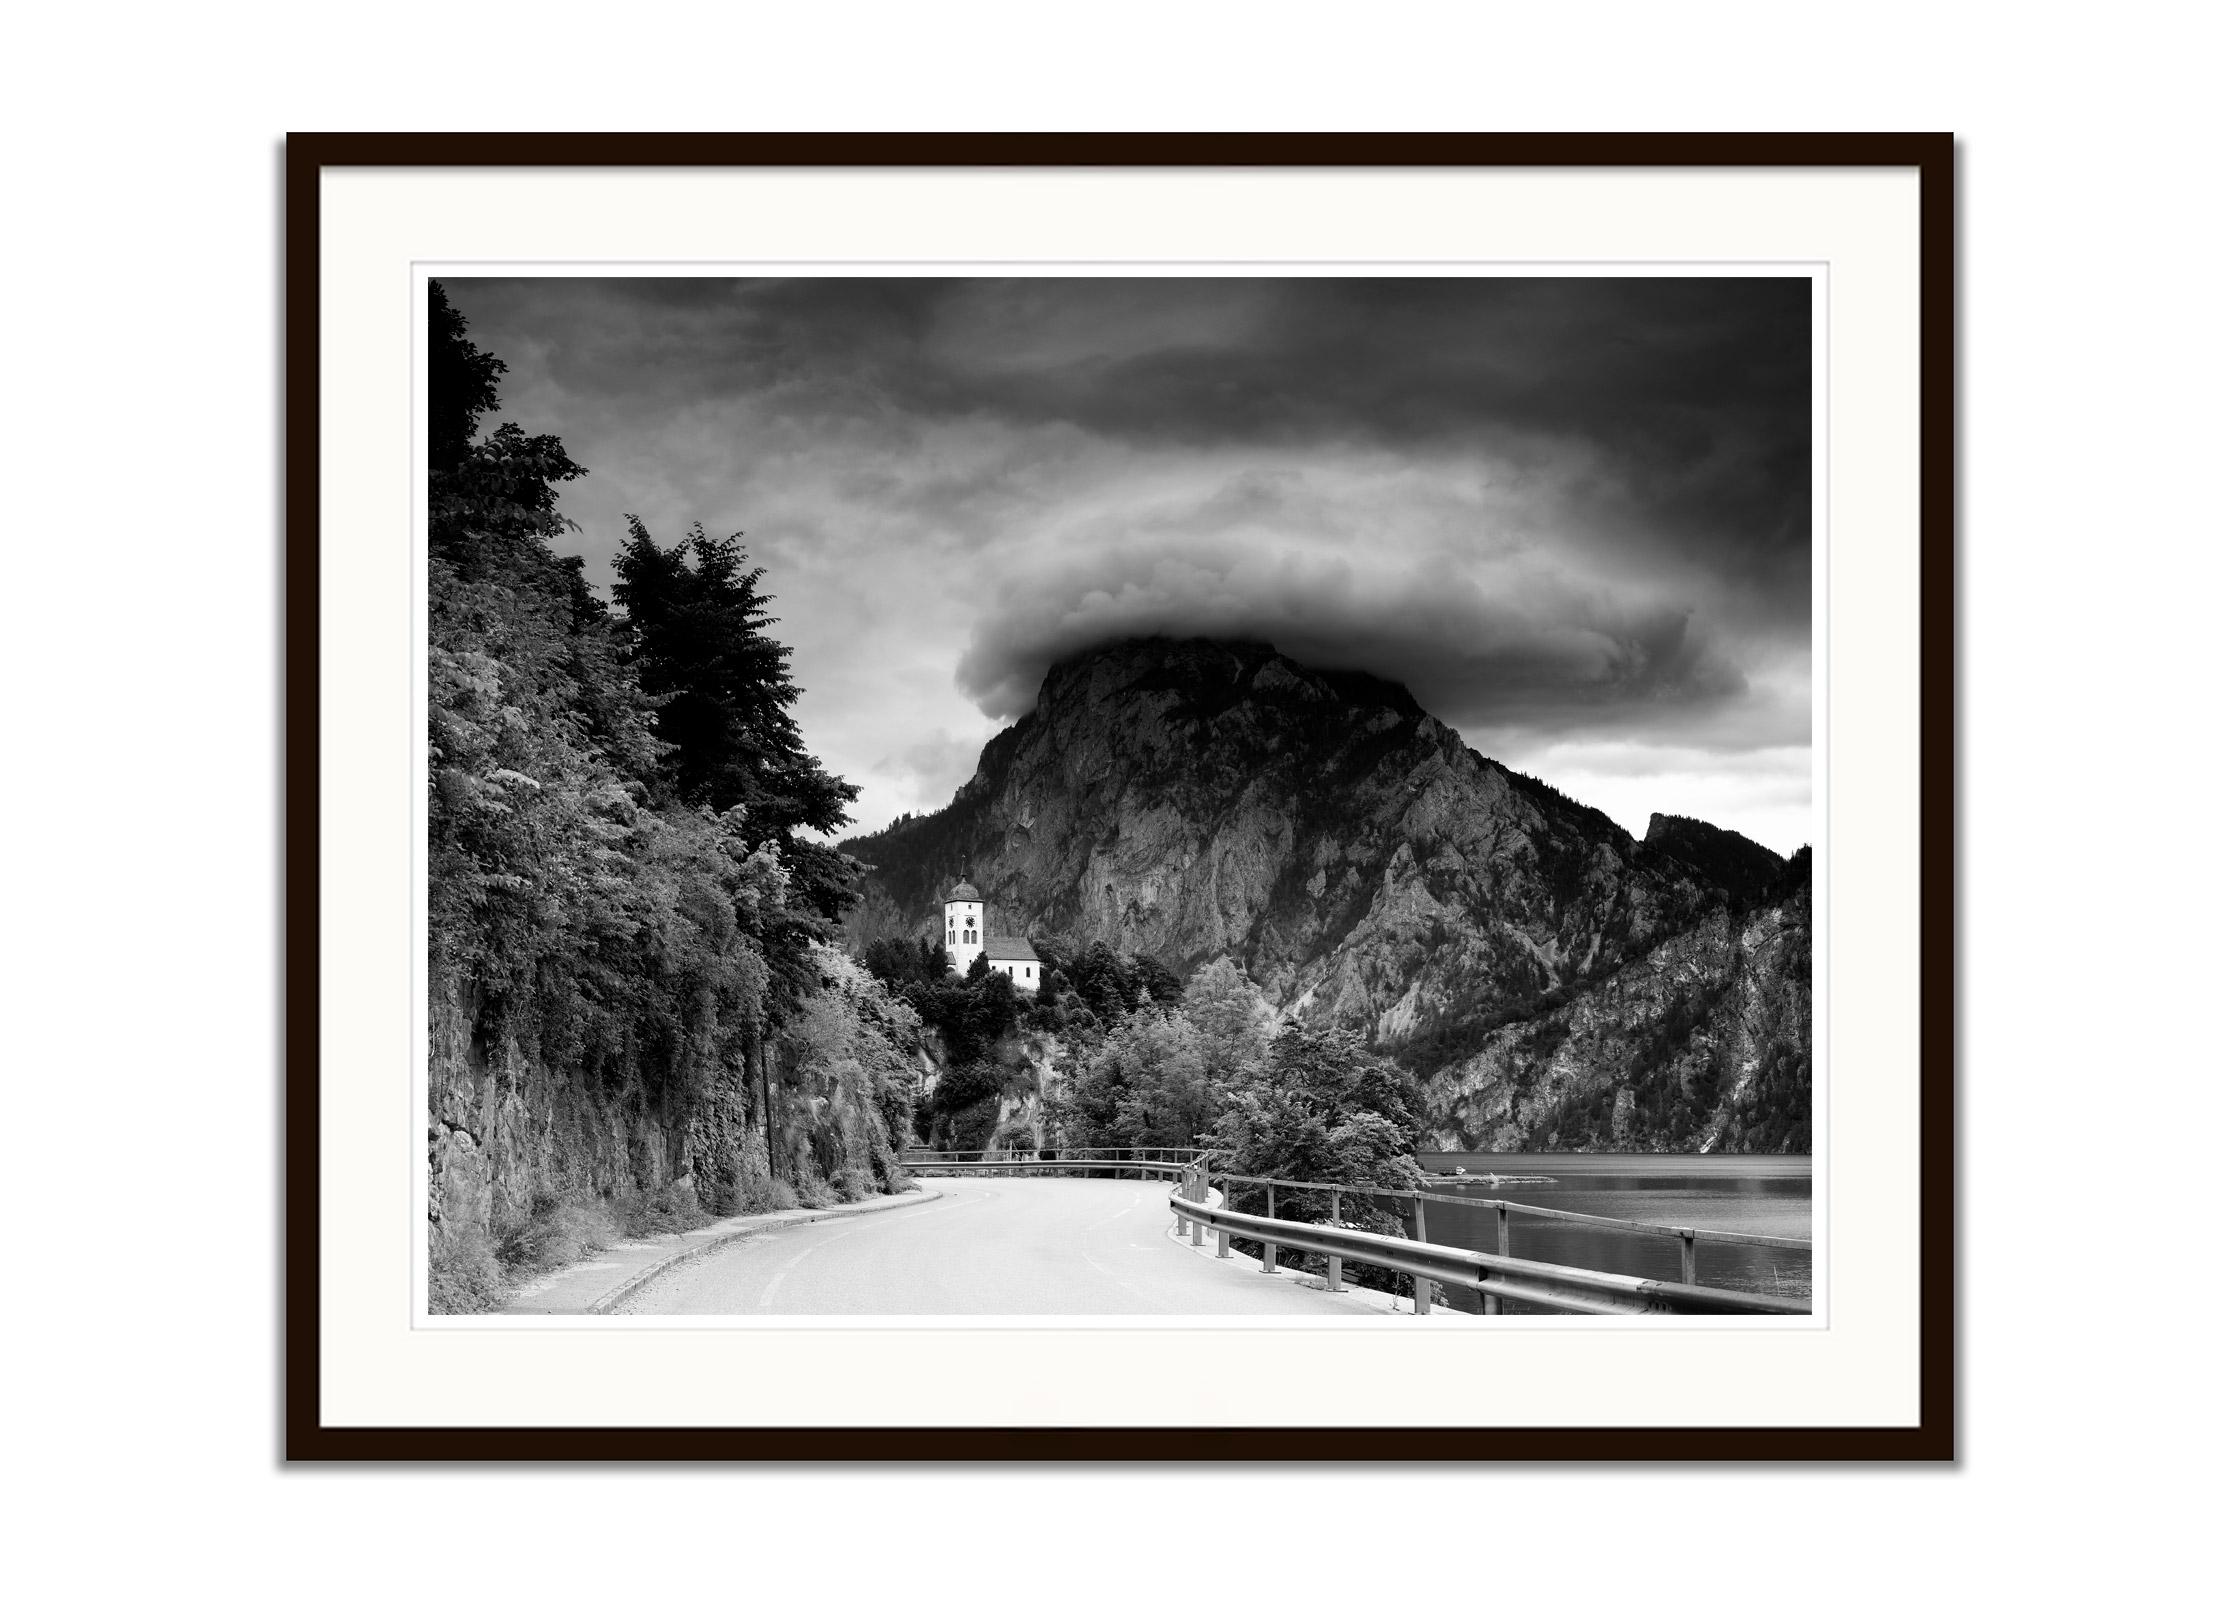 Johannesbergkapelle, Mountain Chapel, black and white photography, landscape - Contemporary Photograph by Gerald Berghammer